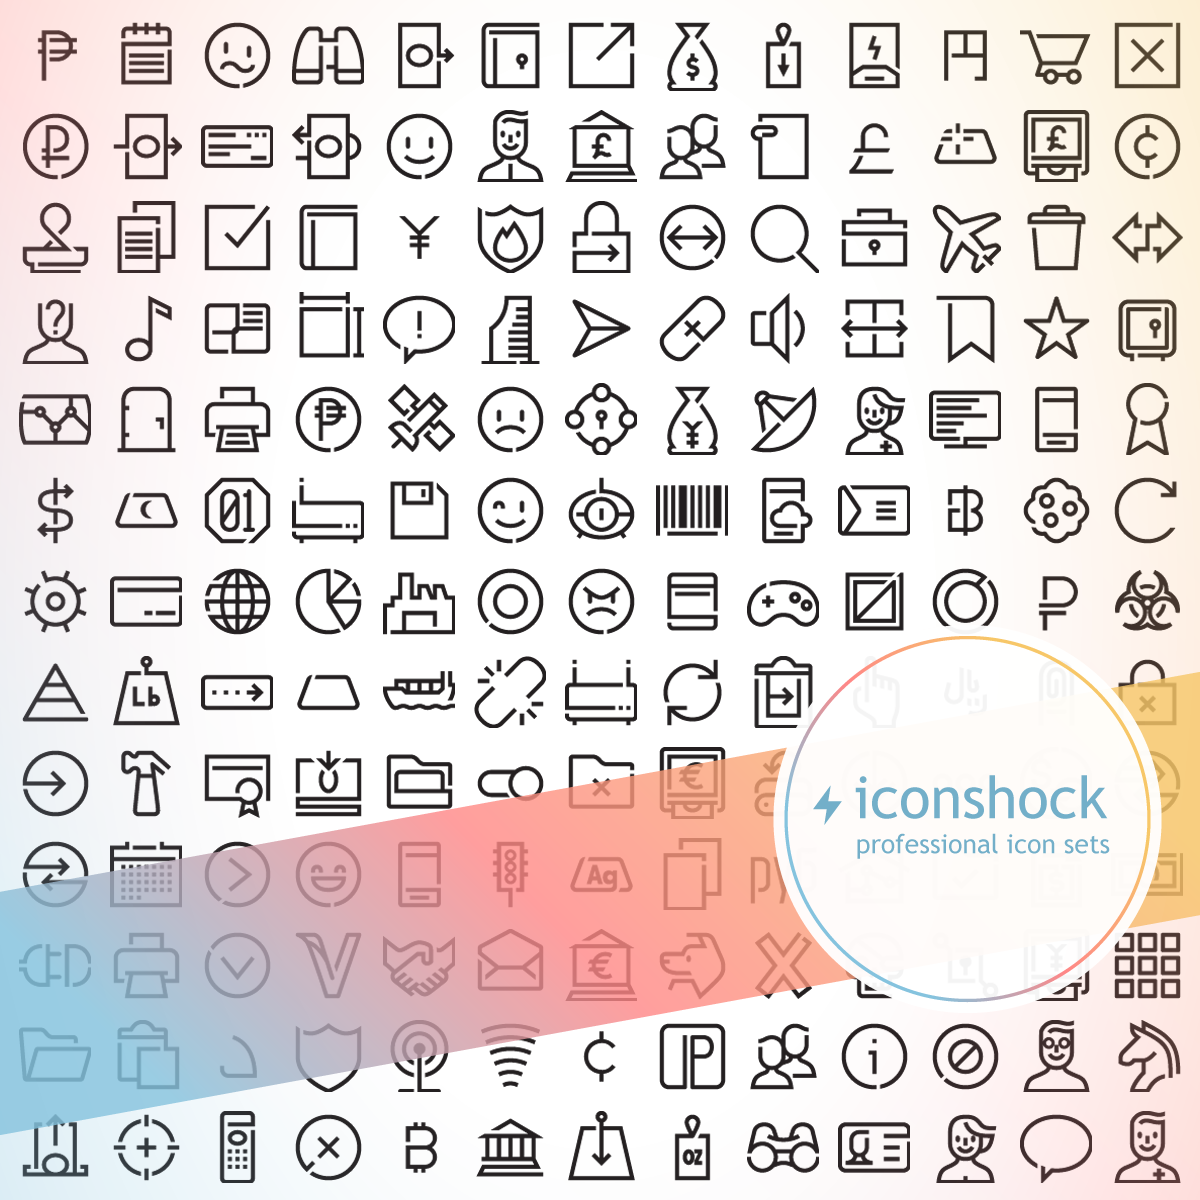 What are Glyph Icons